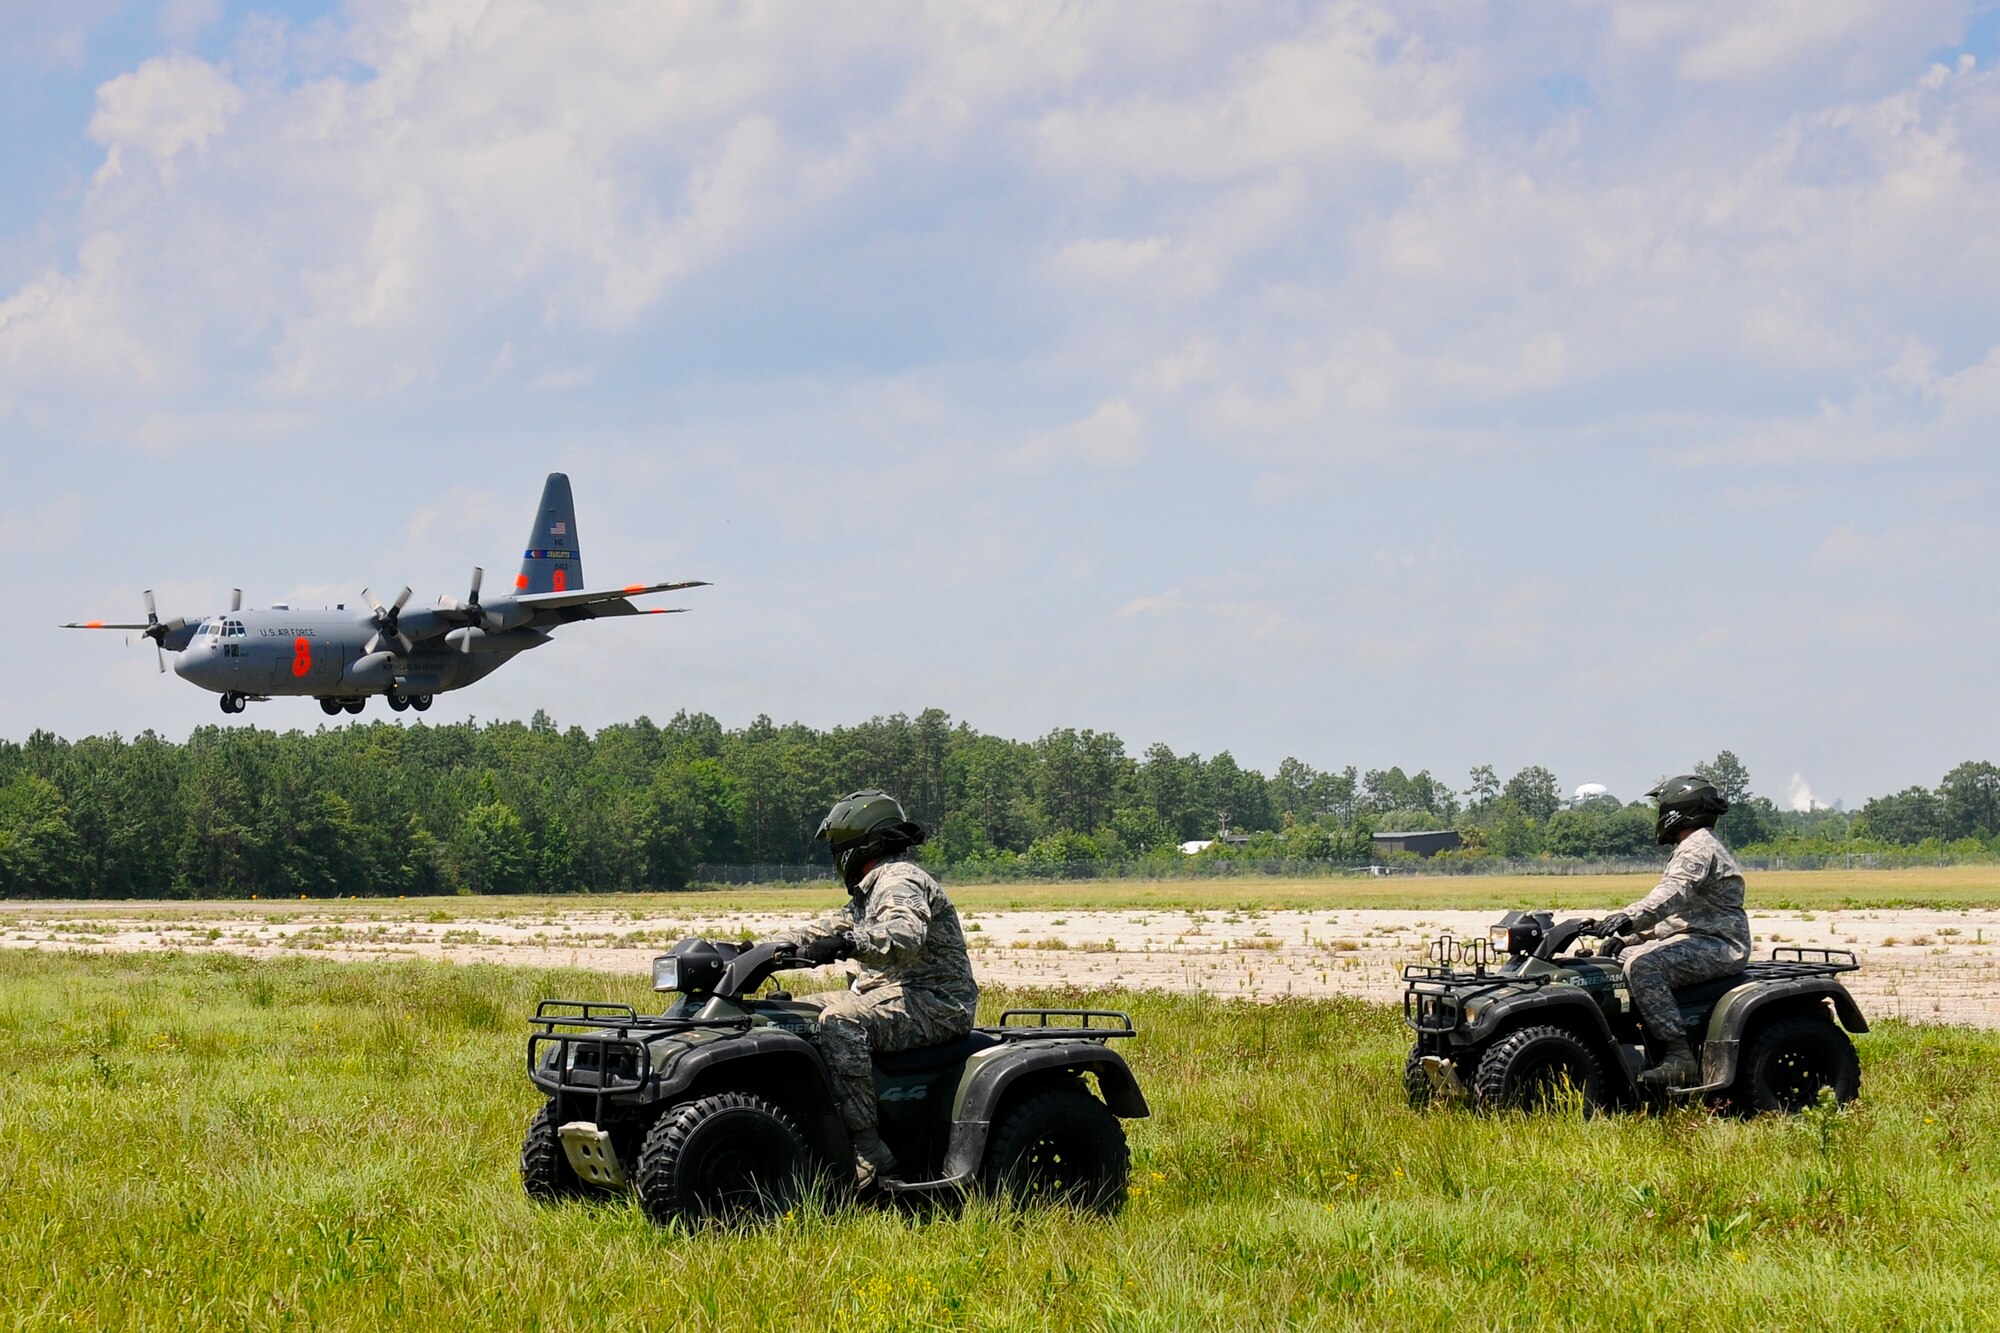 U.S. Air Force Tech. Sgt. Eric Peter and Staff Sgt. Chad Peebles, assigned to the 169th Security Forces Squadron, South Carolina Air National Guard, conduct perimeter checks with ATV’s while a C-130 Hercules cargo plane, assigned to the 145th Airlift Wing, lands at the Georgetown County Airport, S.C., June 5, 2014.  South Carolina National Guard Soldiers and Airmen are working side-by-side with the S.C. Emergency Management Division and first responders from local emergency agencies, to effectively respond to any hurricane that may threaten the state. The exercise is based on a hurricane post-landfall response between federal, state and local agencies, which includes training in communications, first responder skills, with the focus on how to better protect and assist citizens during emergency situations.  (U.S. Air National Guard photo by Tech. Sgt. Jorge Intriago/Released)
